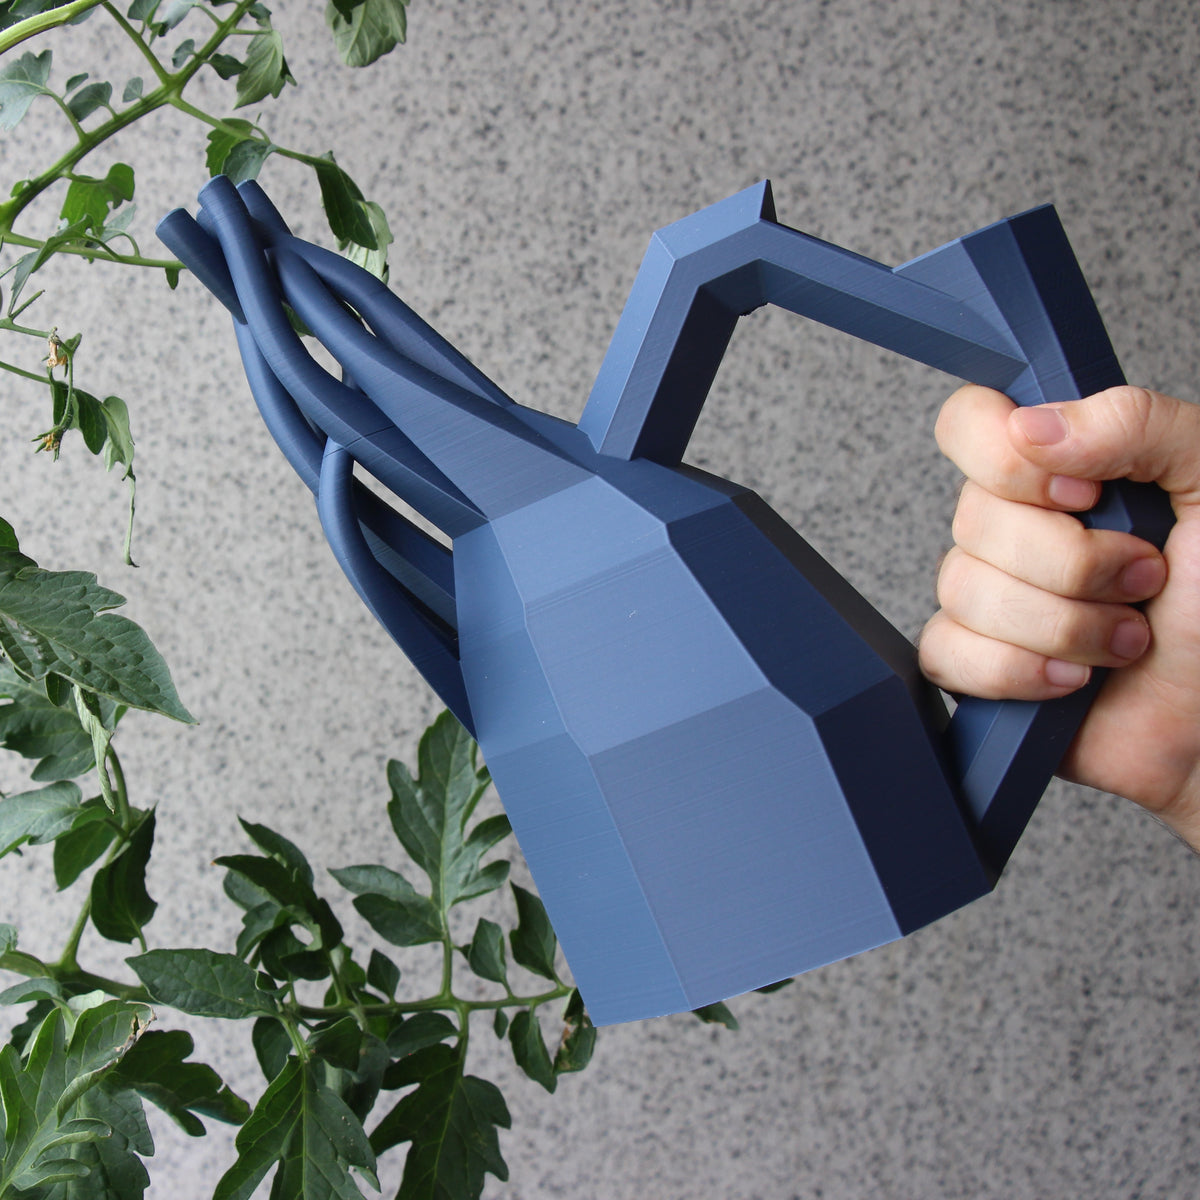 The Squid Watering Can